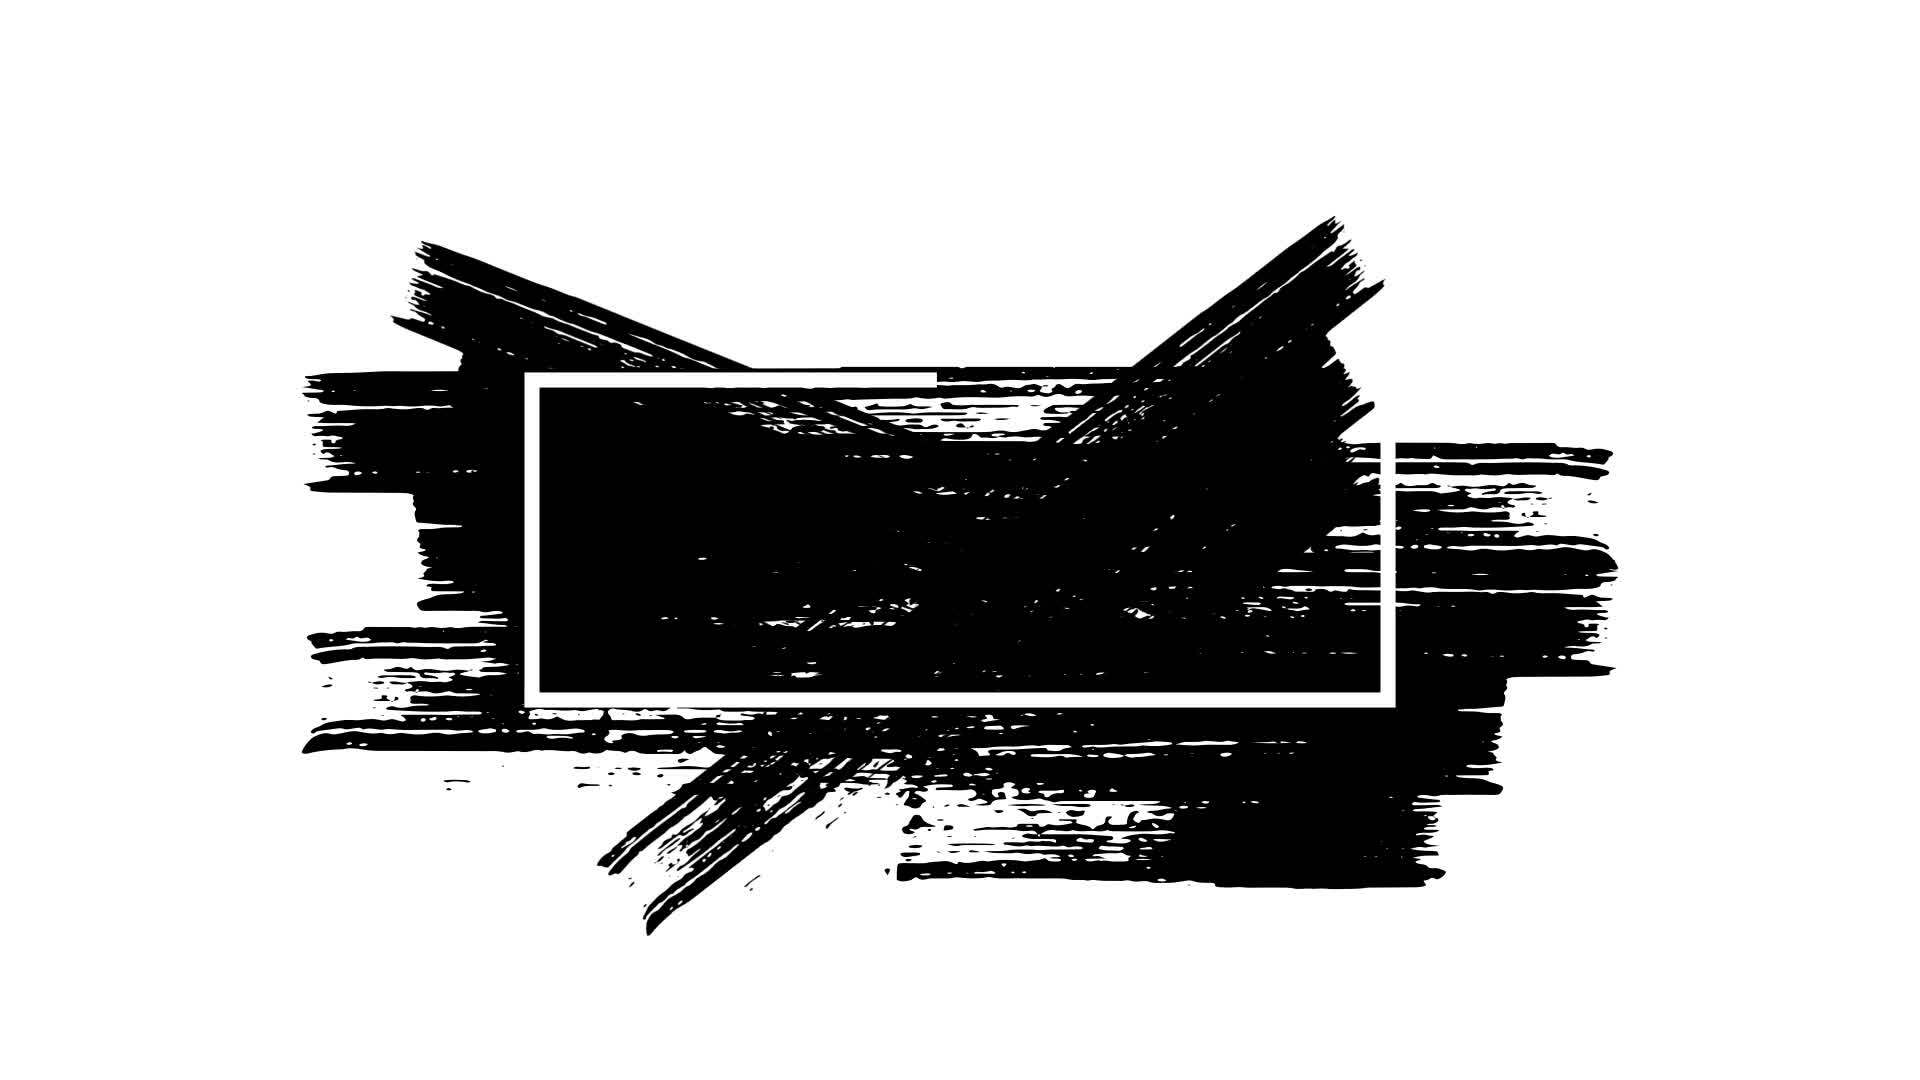 https://static.vecteezy.com/system/resources/thumbnails/026/720/705/original/abstract-black-brush-stroke-animation-for-text-effect-painting-black-brush-grunge-background-for-titles-or-other-your-text-with-alpha-channel-free-video.jpg